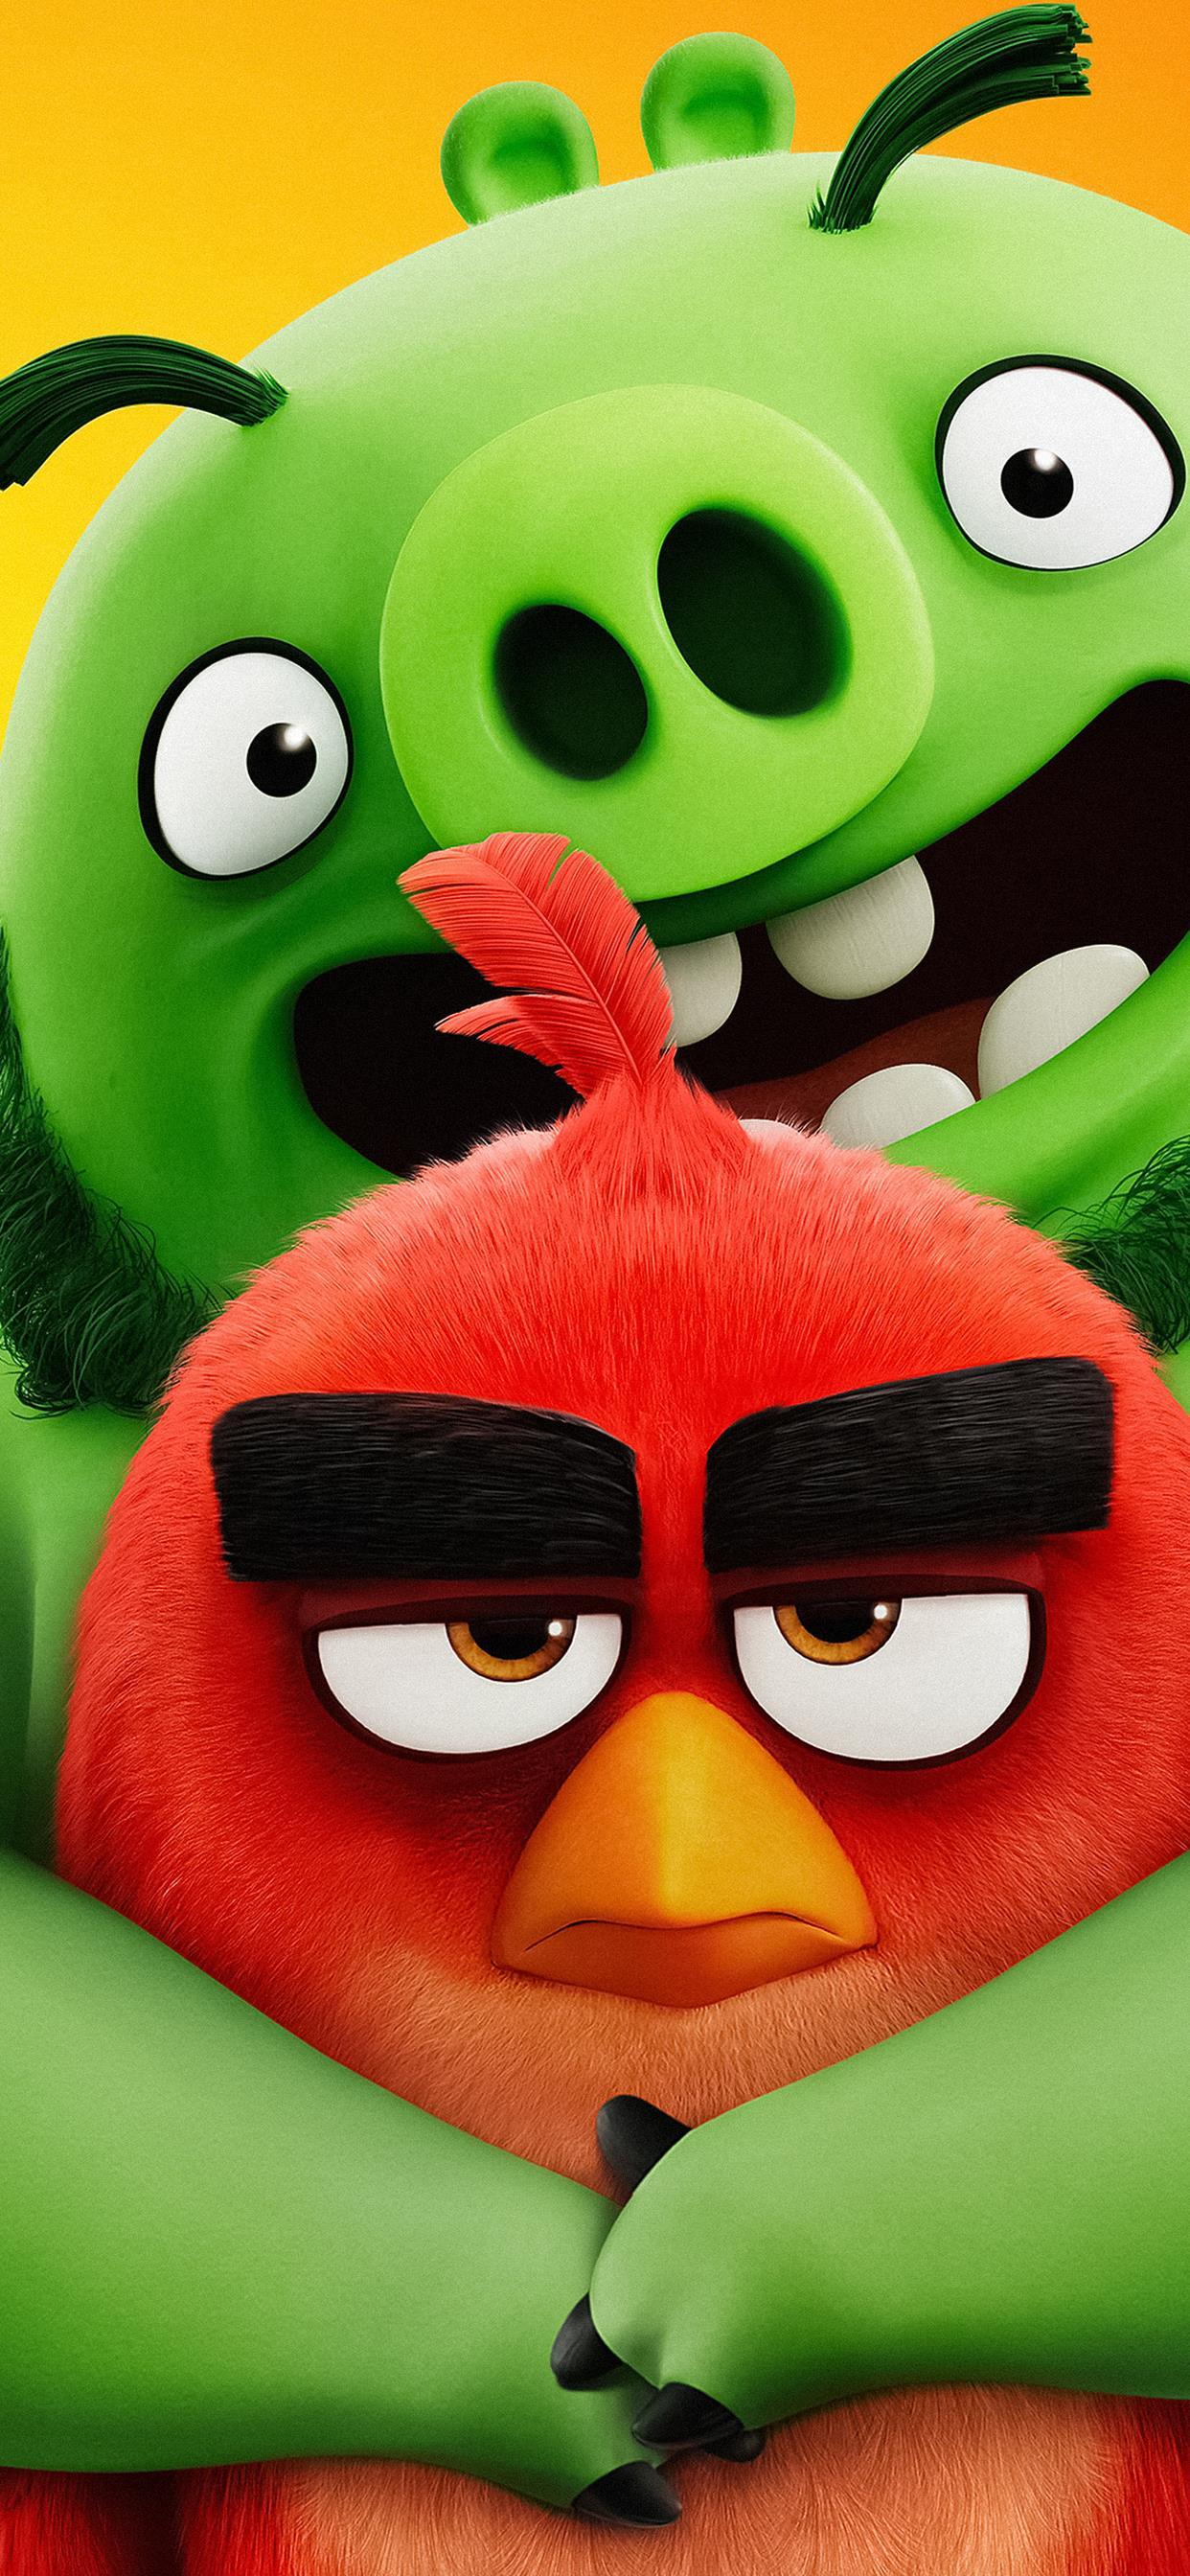 Wallpaper The Angry Birds Movie 2, poster, 4K, Movies #21803